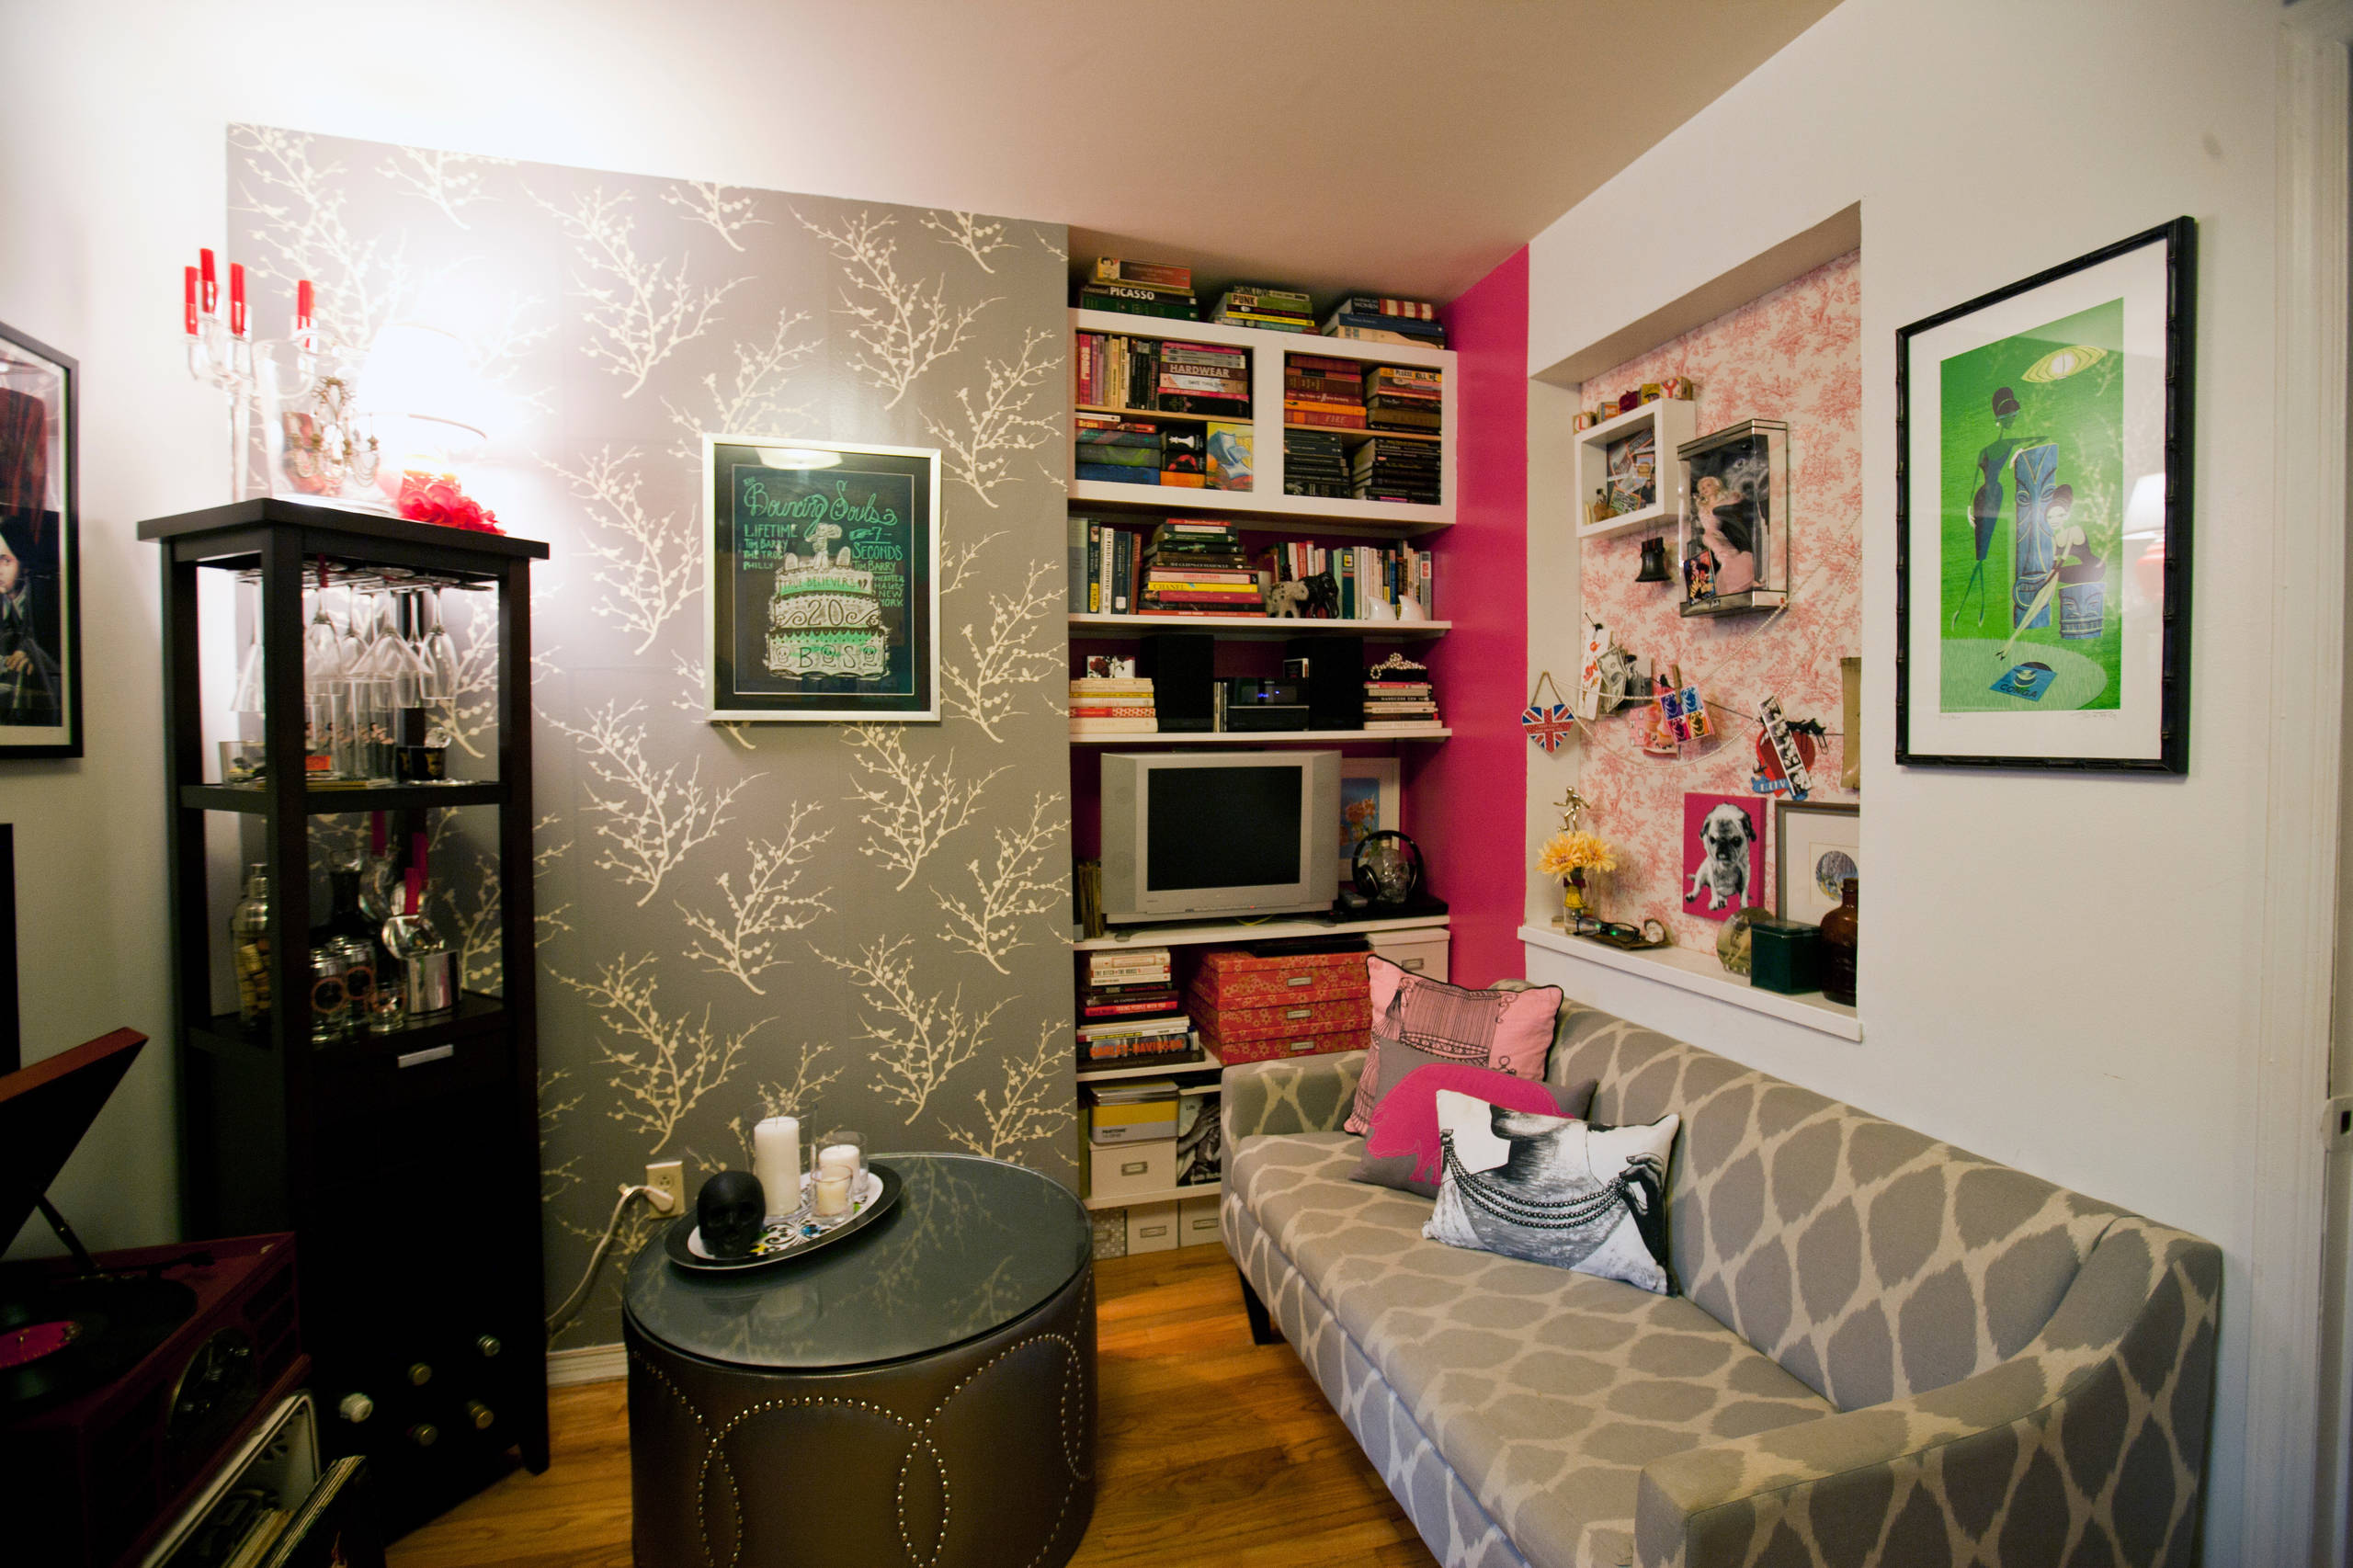 Teeny Tiny Itty Bitty studio apartment - Eclectic - Living Room - New York  - by apartmentjeanie | Houzz